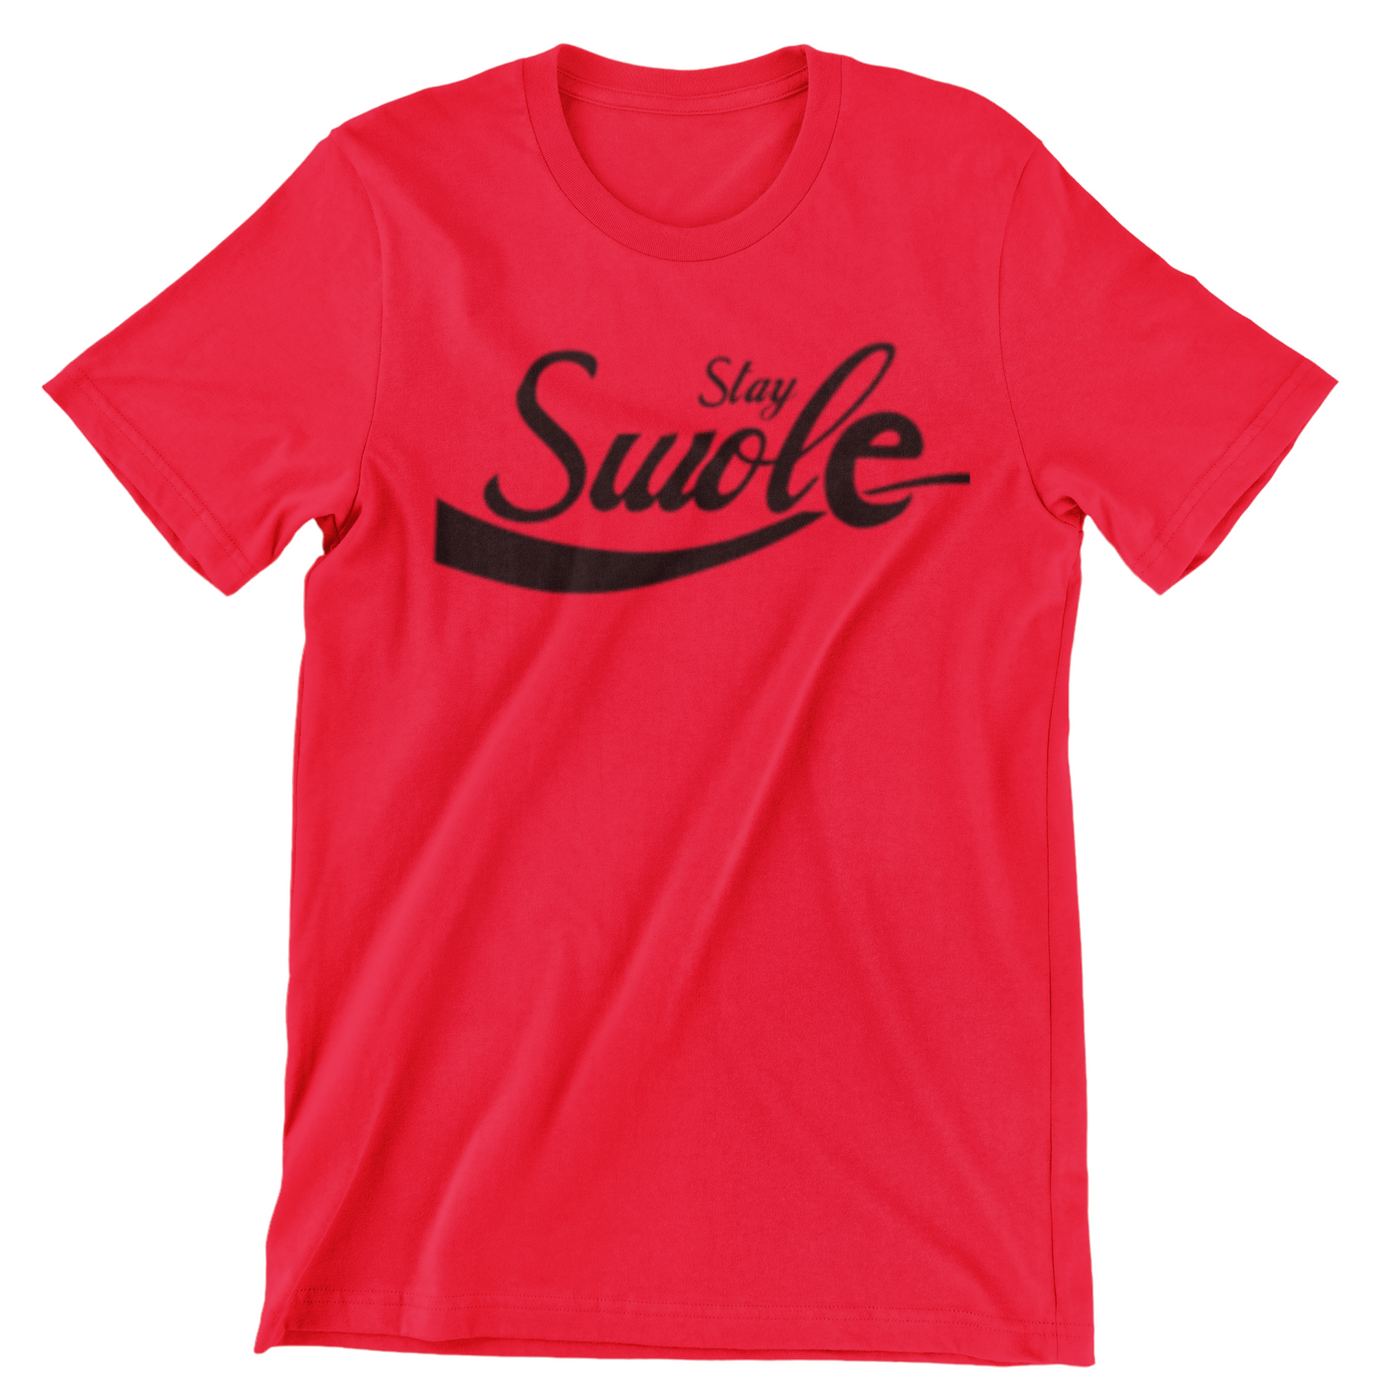 Red & Black Stay Swole T-Shirt